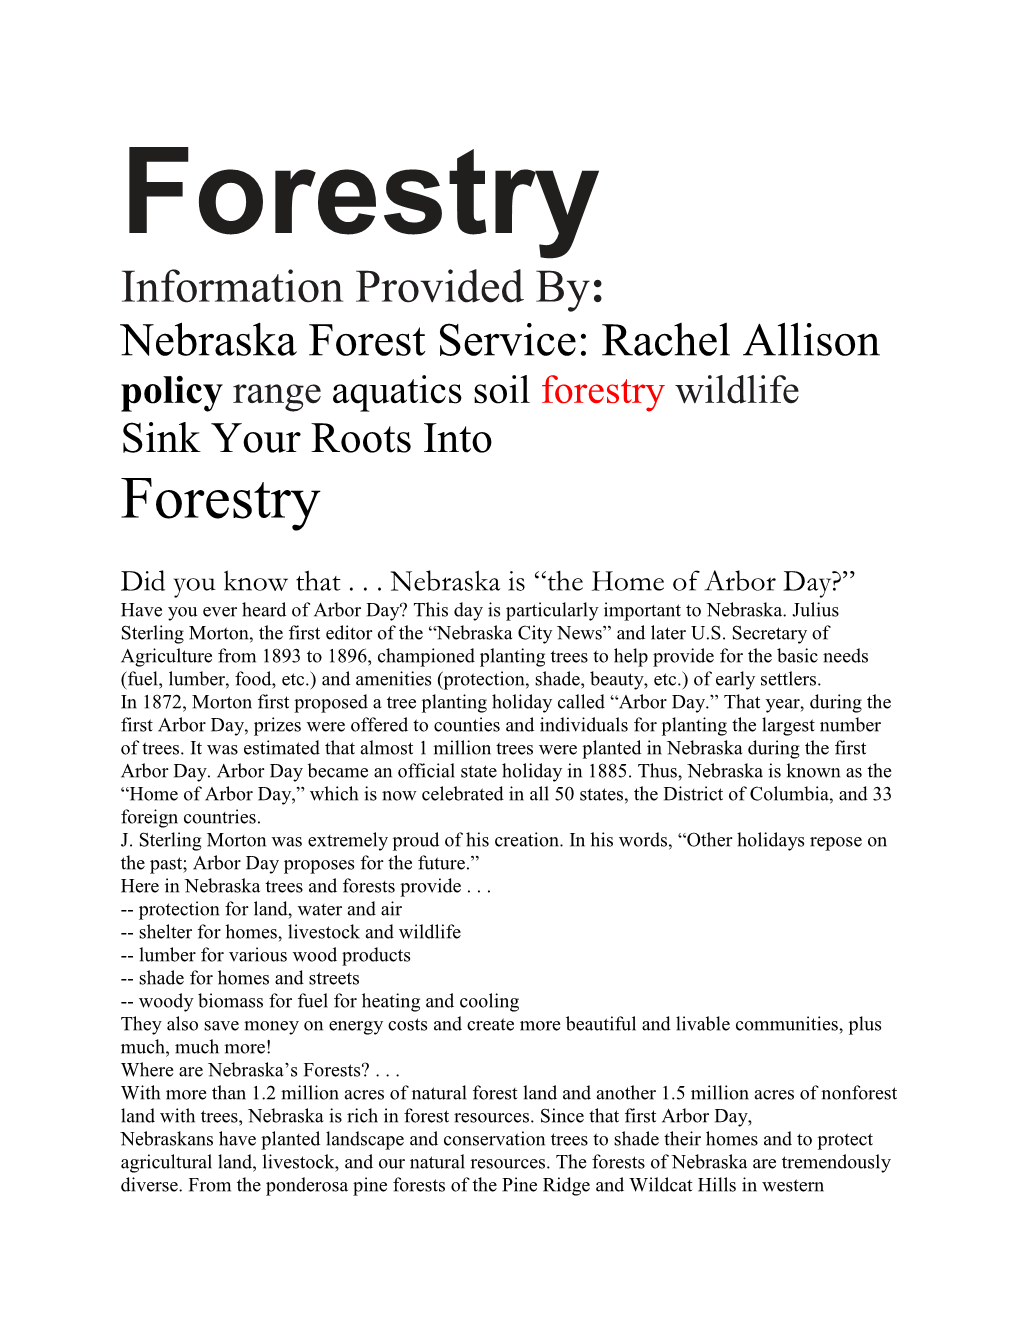 Forestry Information Provided By: Nebraska Forest Service: Rachel Allison Policy Range Aquatics Soil Forestry Wildlife Sink Your Roots Into Forestry